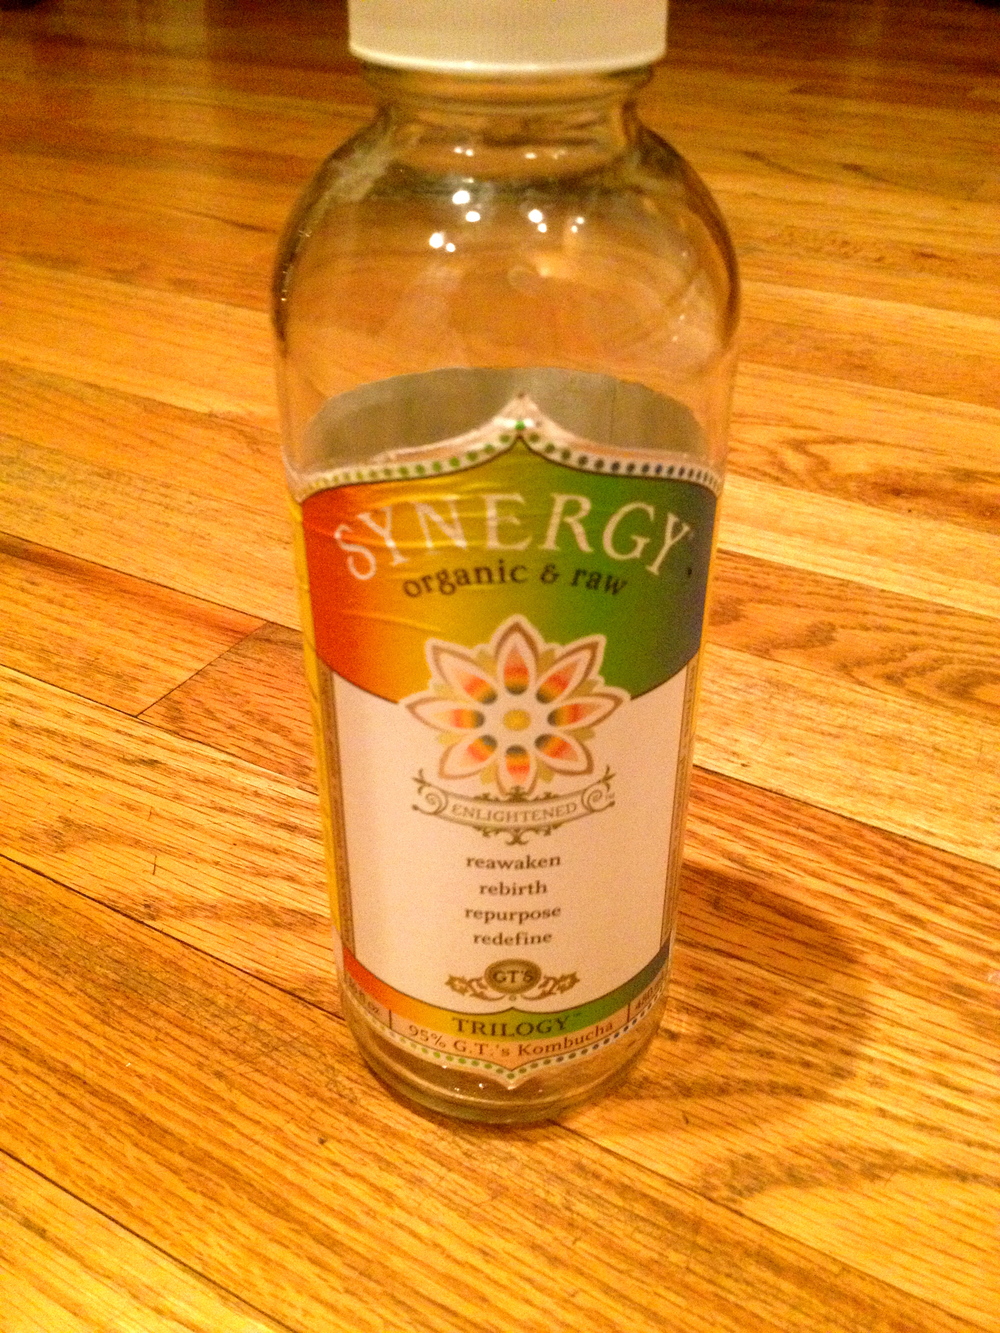 My go-to Kombucha brand is GT. I've tried every other brand out there, and nothing compares to the sweet/spicy/pungent fizz of the Synergy drinks.